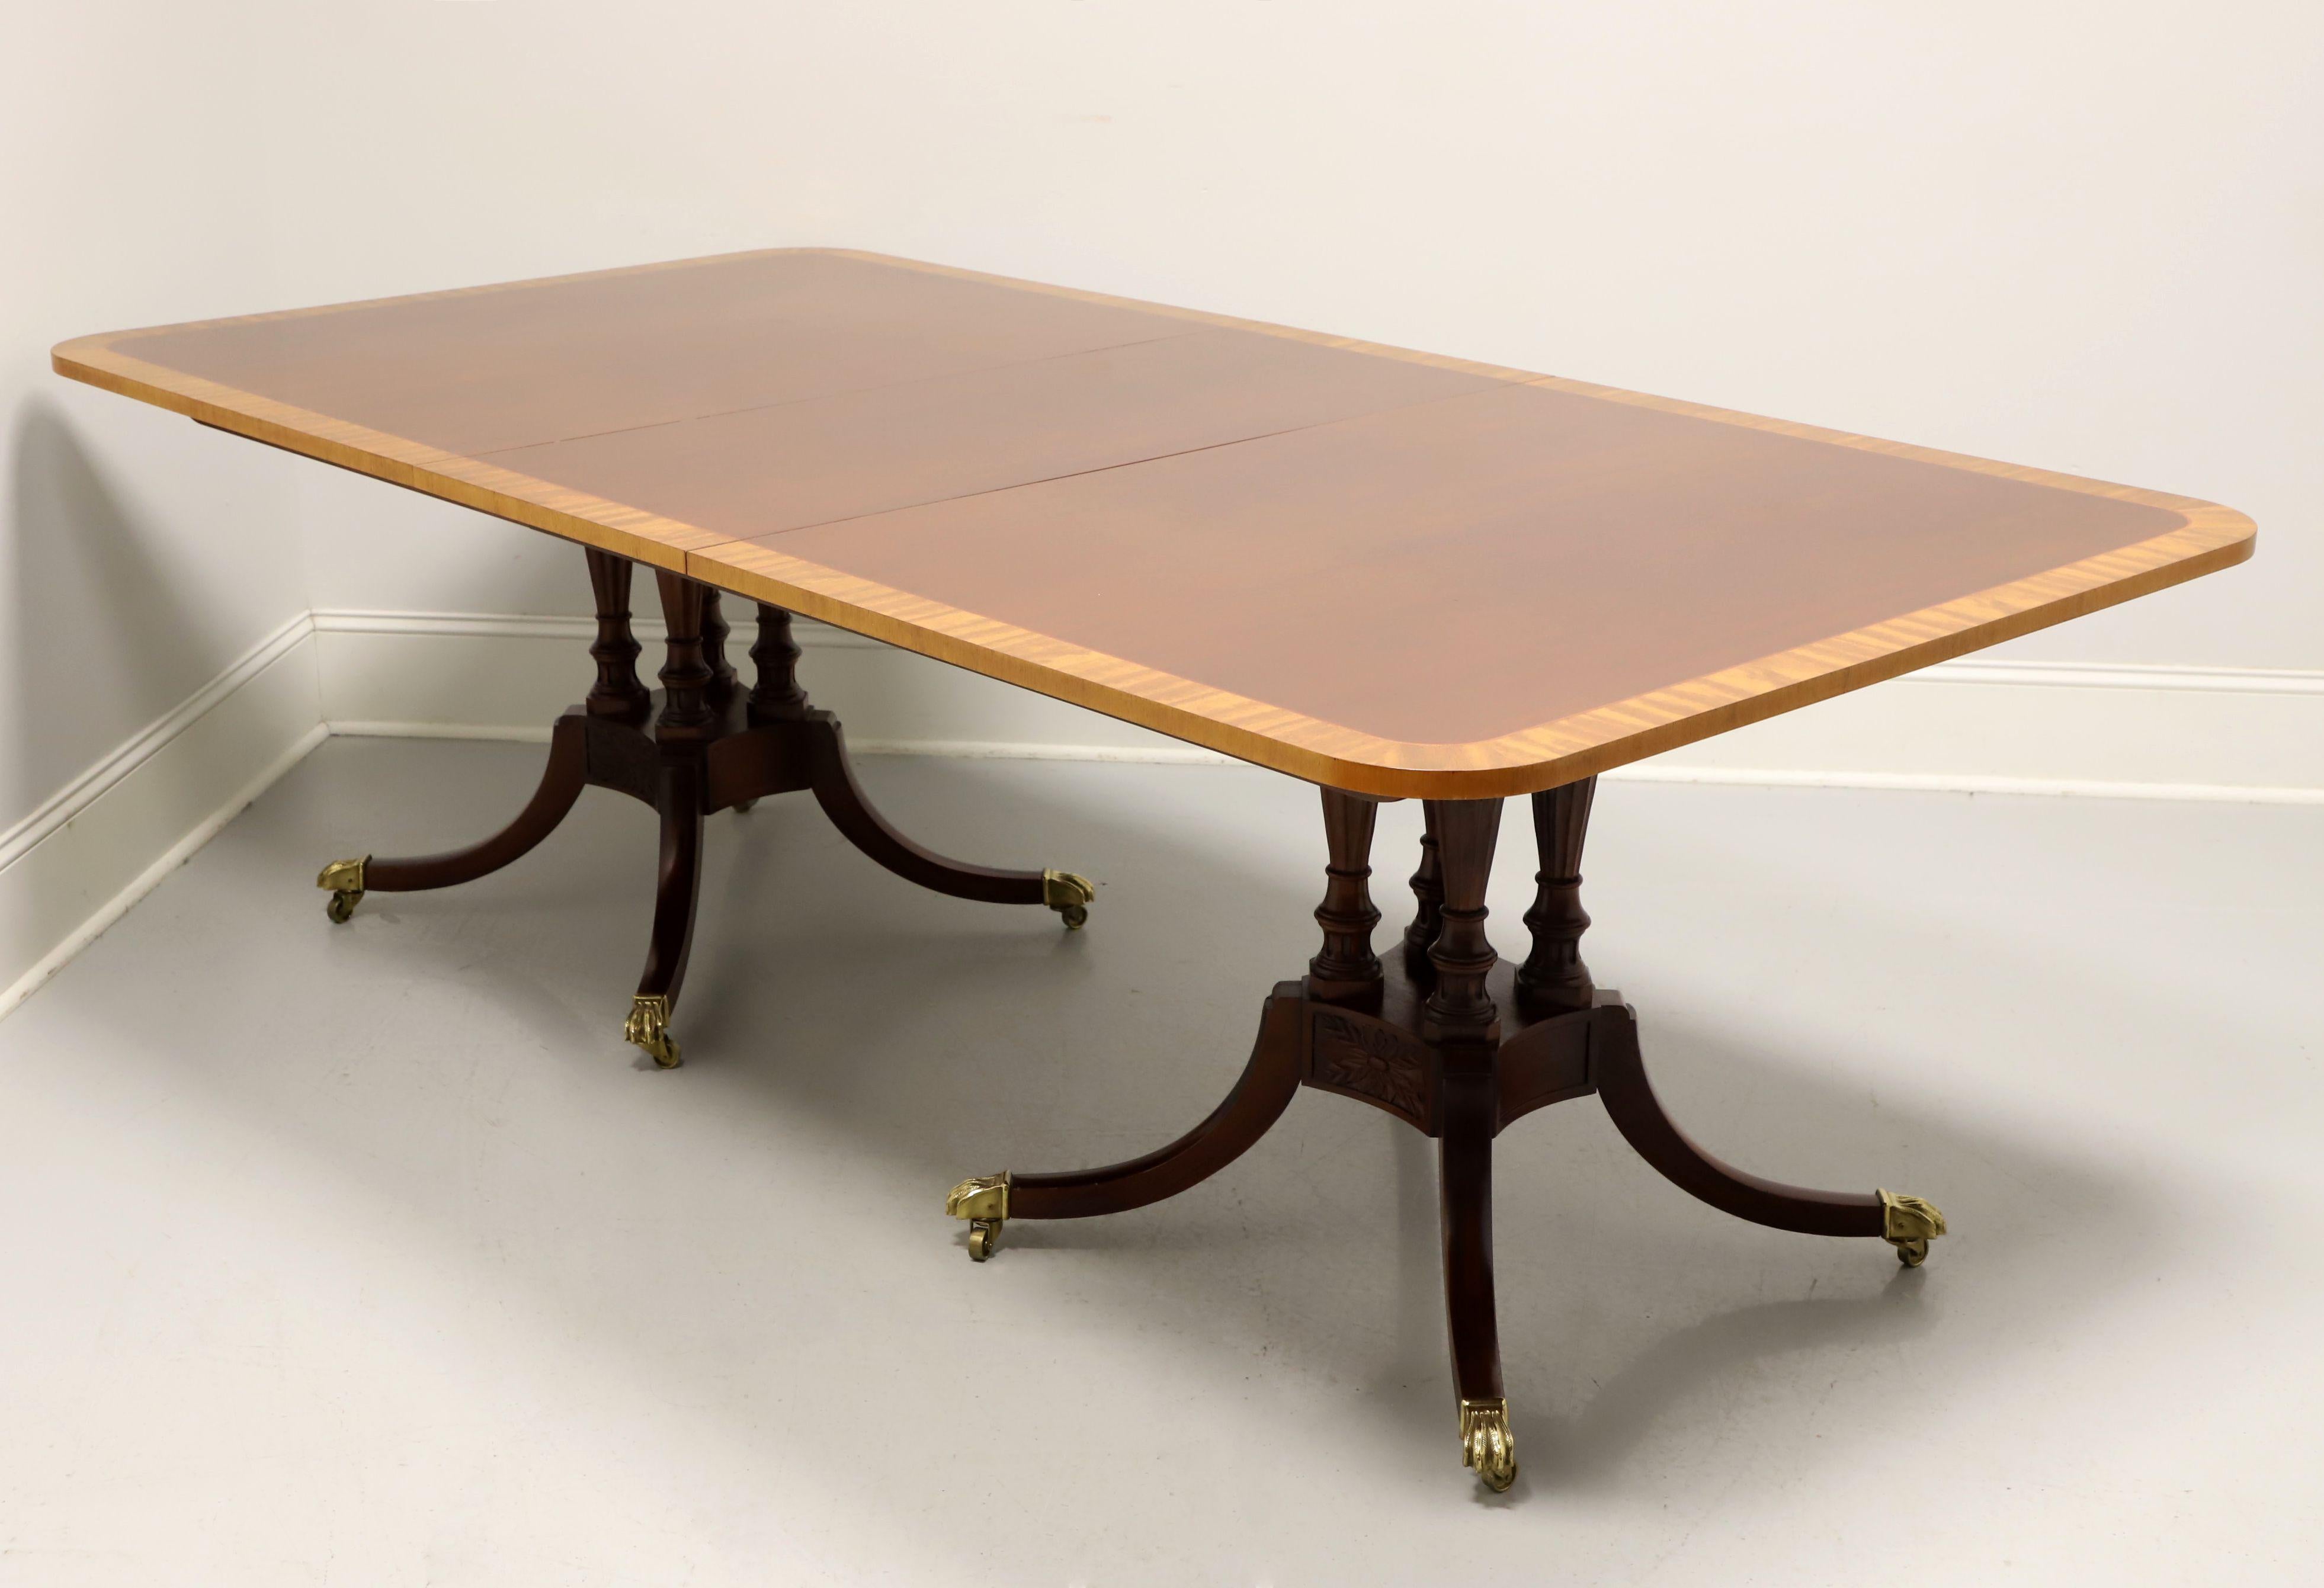 BAKER Historic Charleston Mahogany Satinwood Banded Double Pedestal Dining Table In Good Condition For Sale In Charlotte, NC